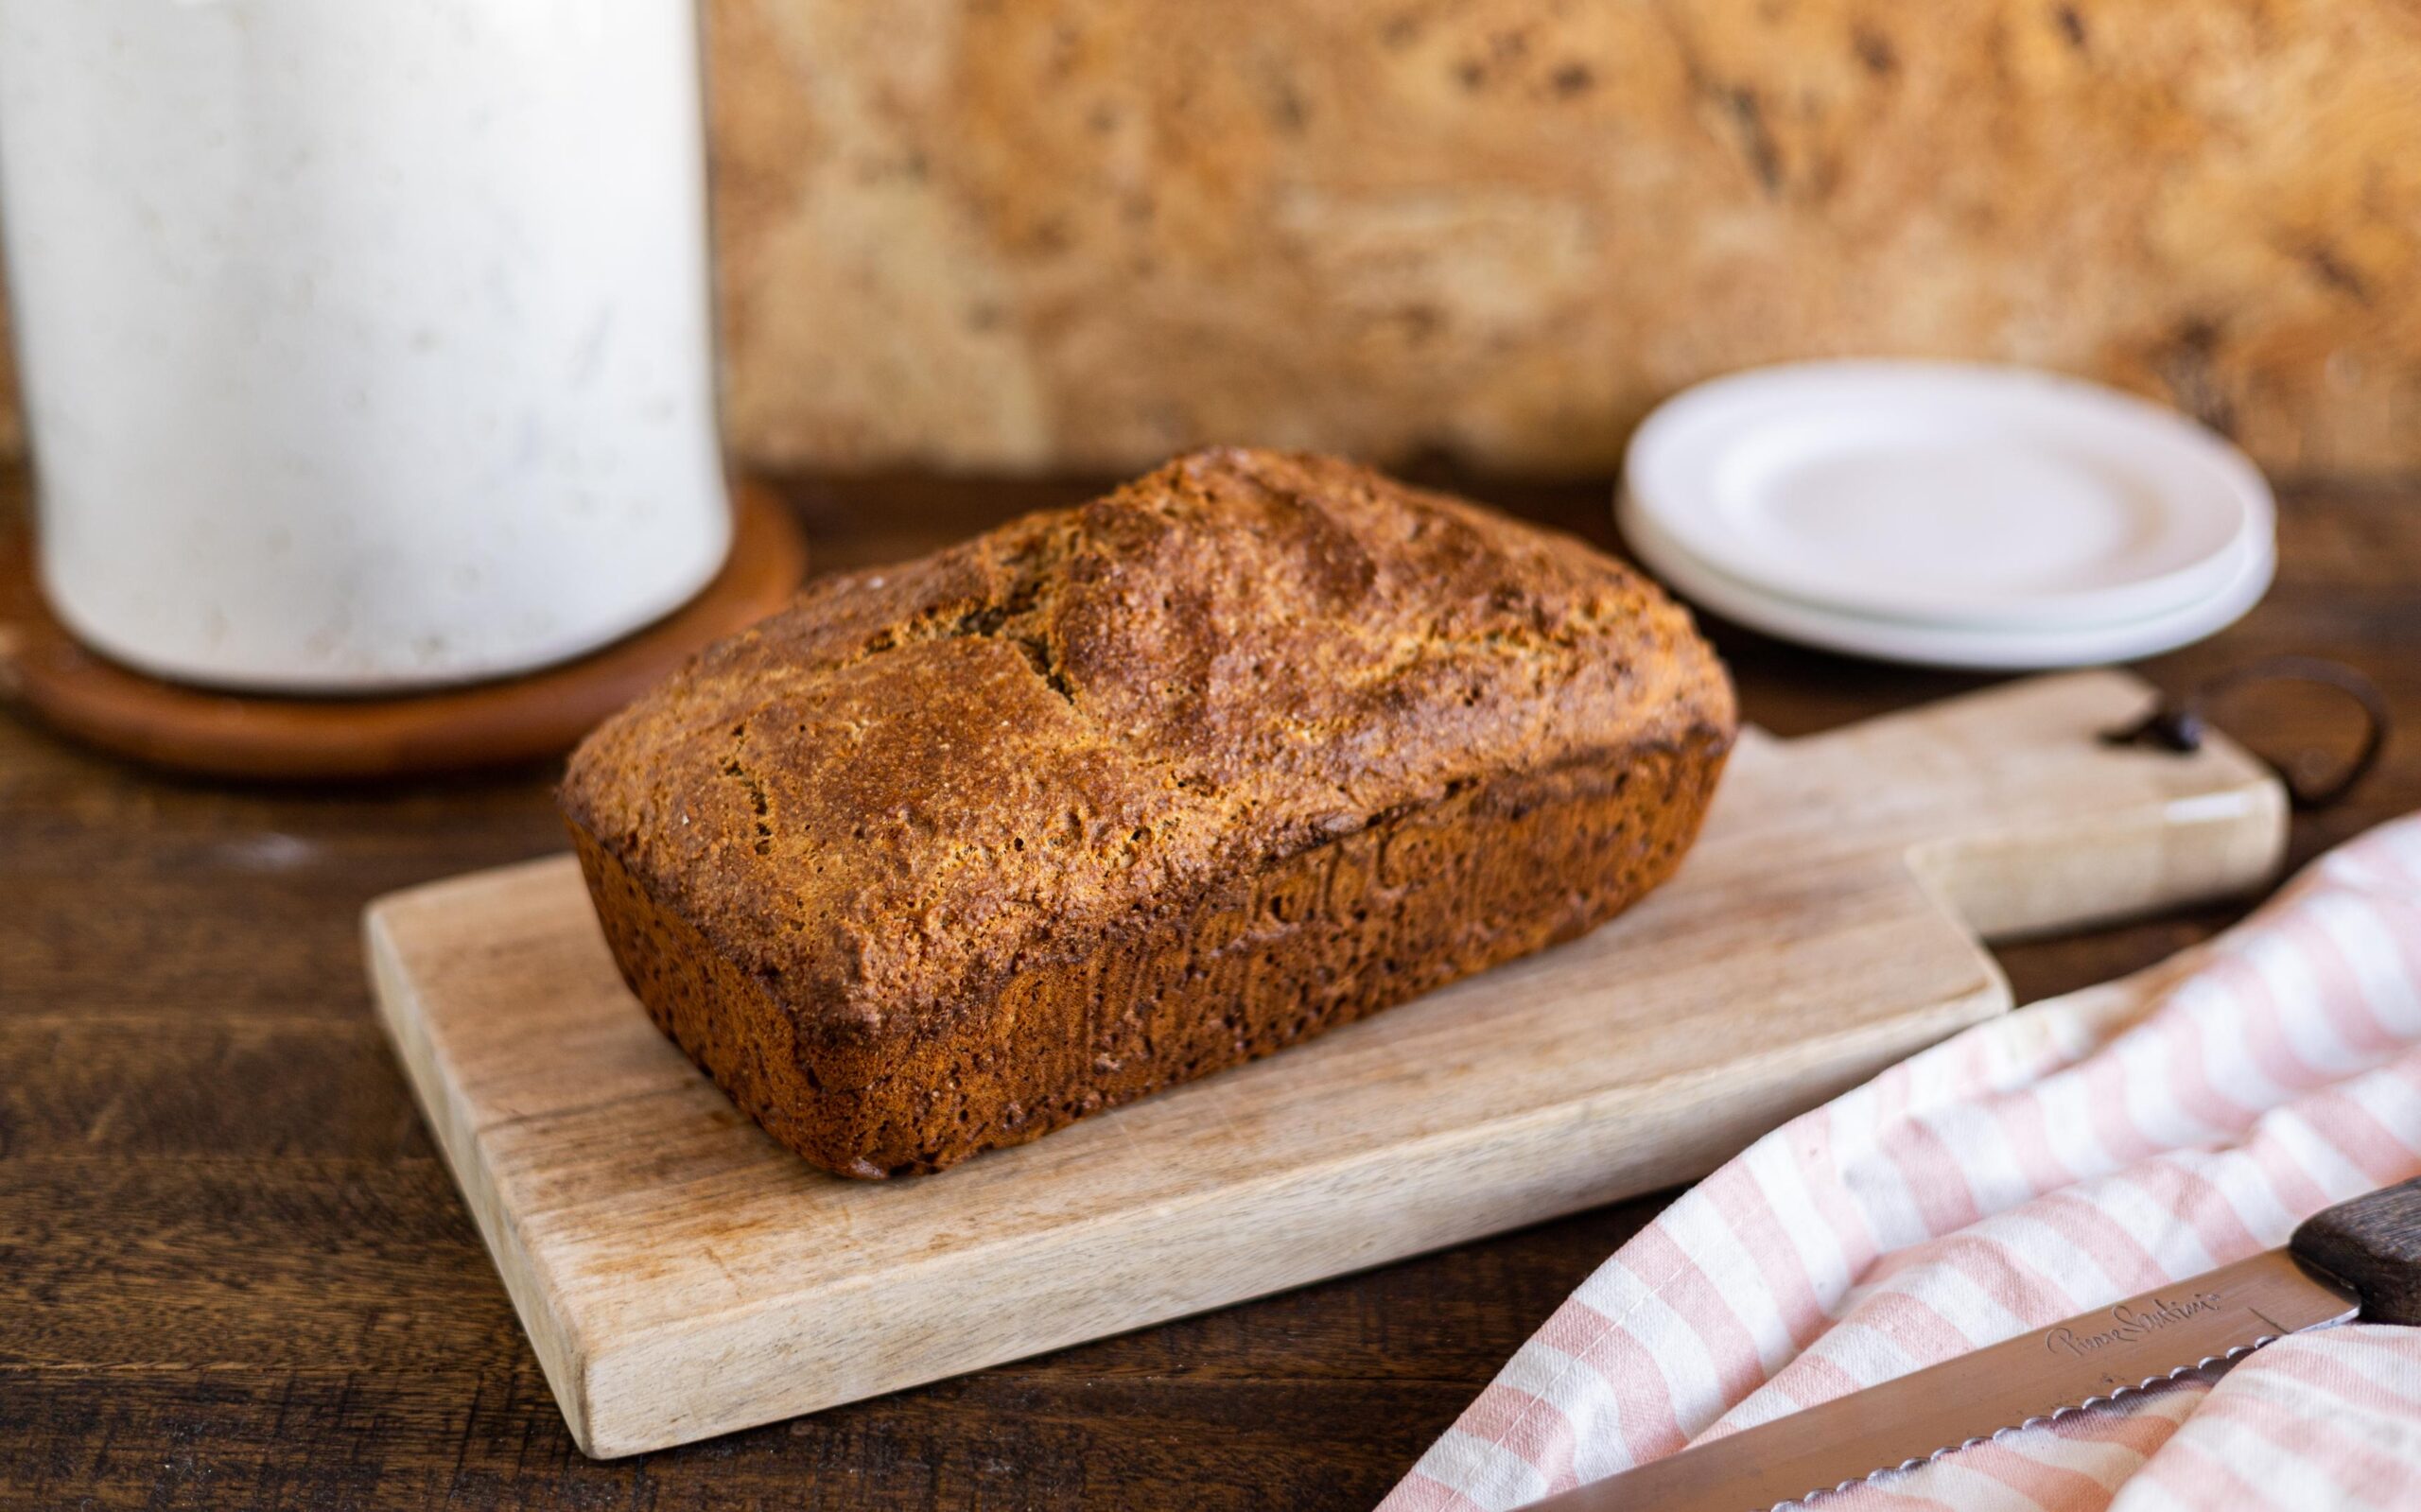  Satisfy your bread cravings with this easy recipe!